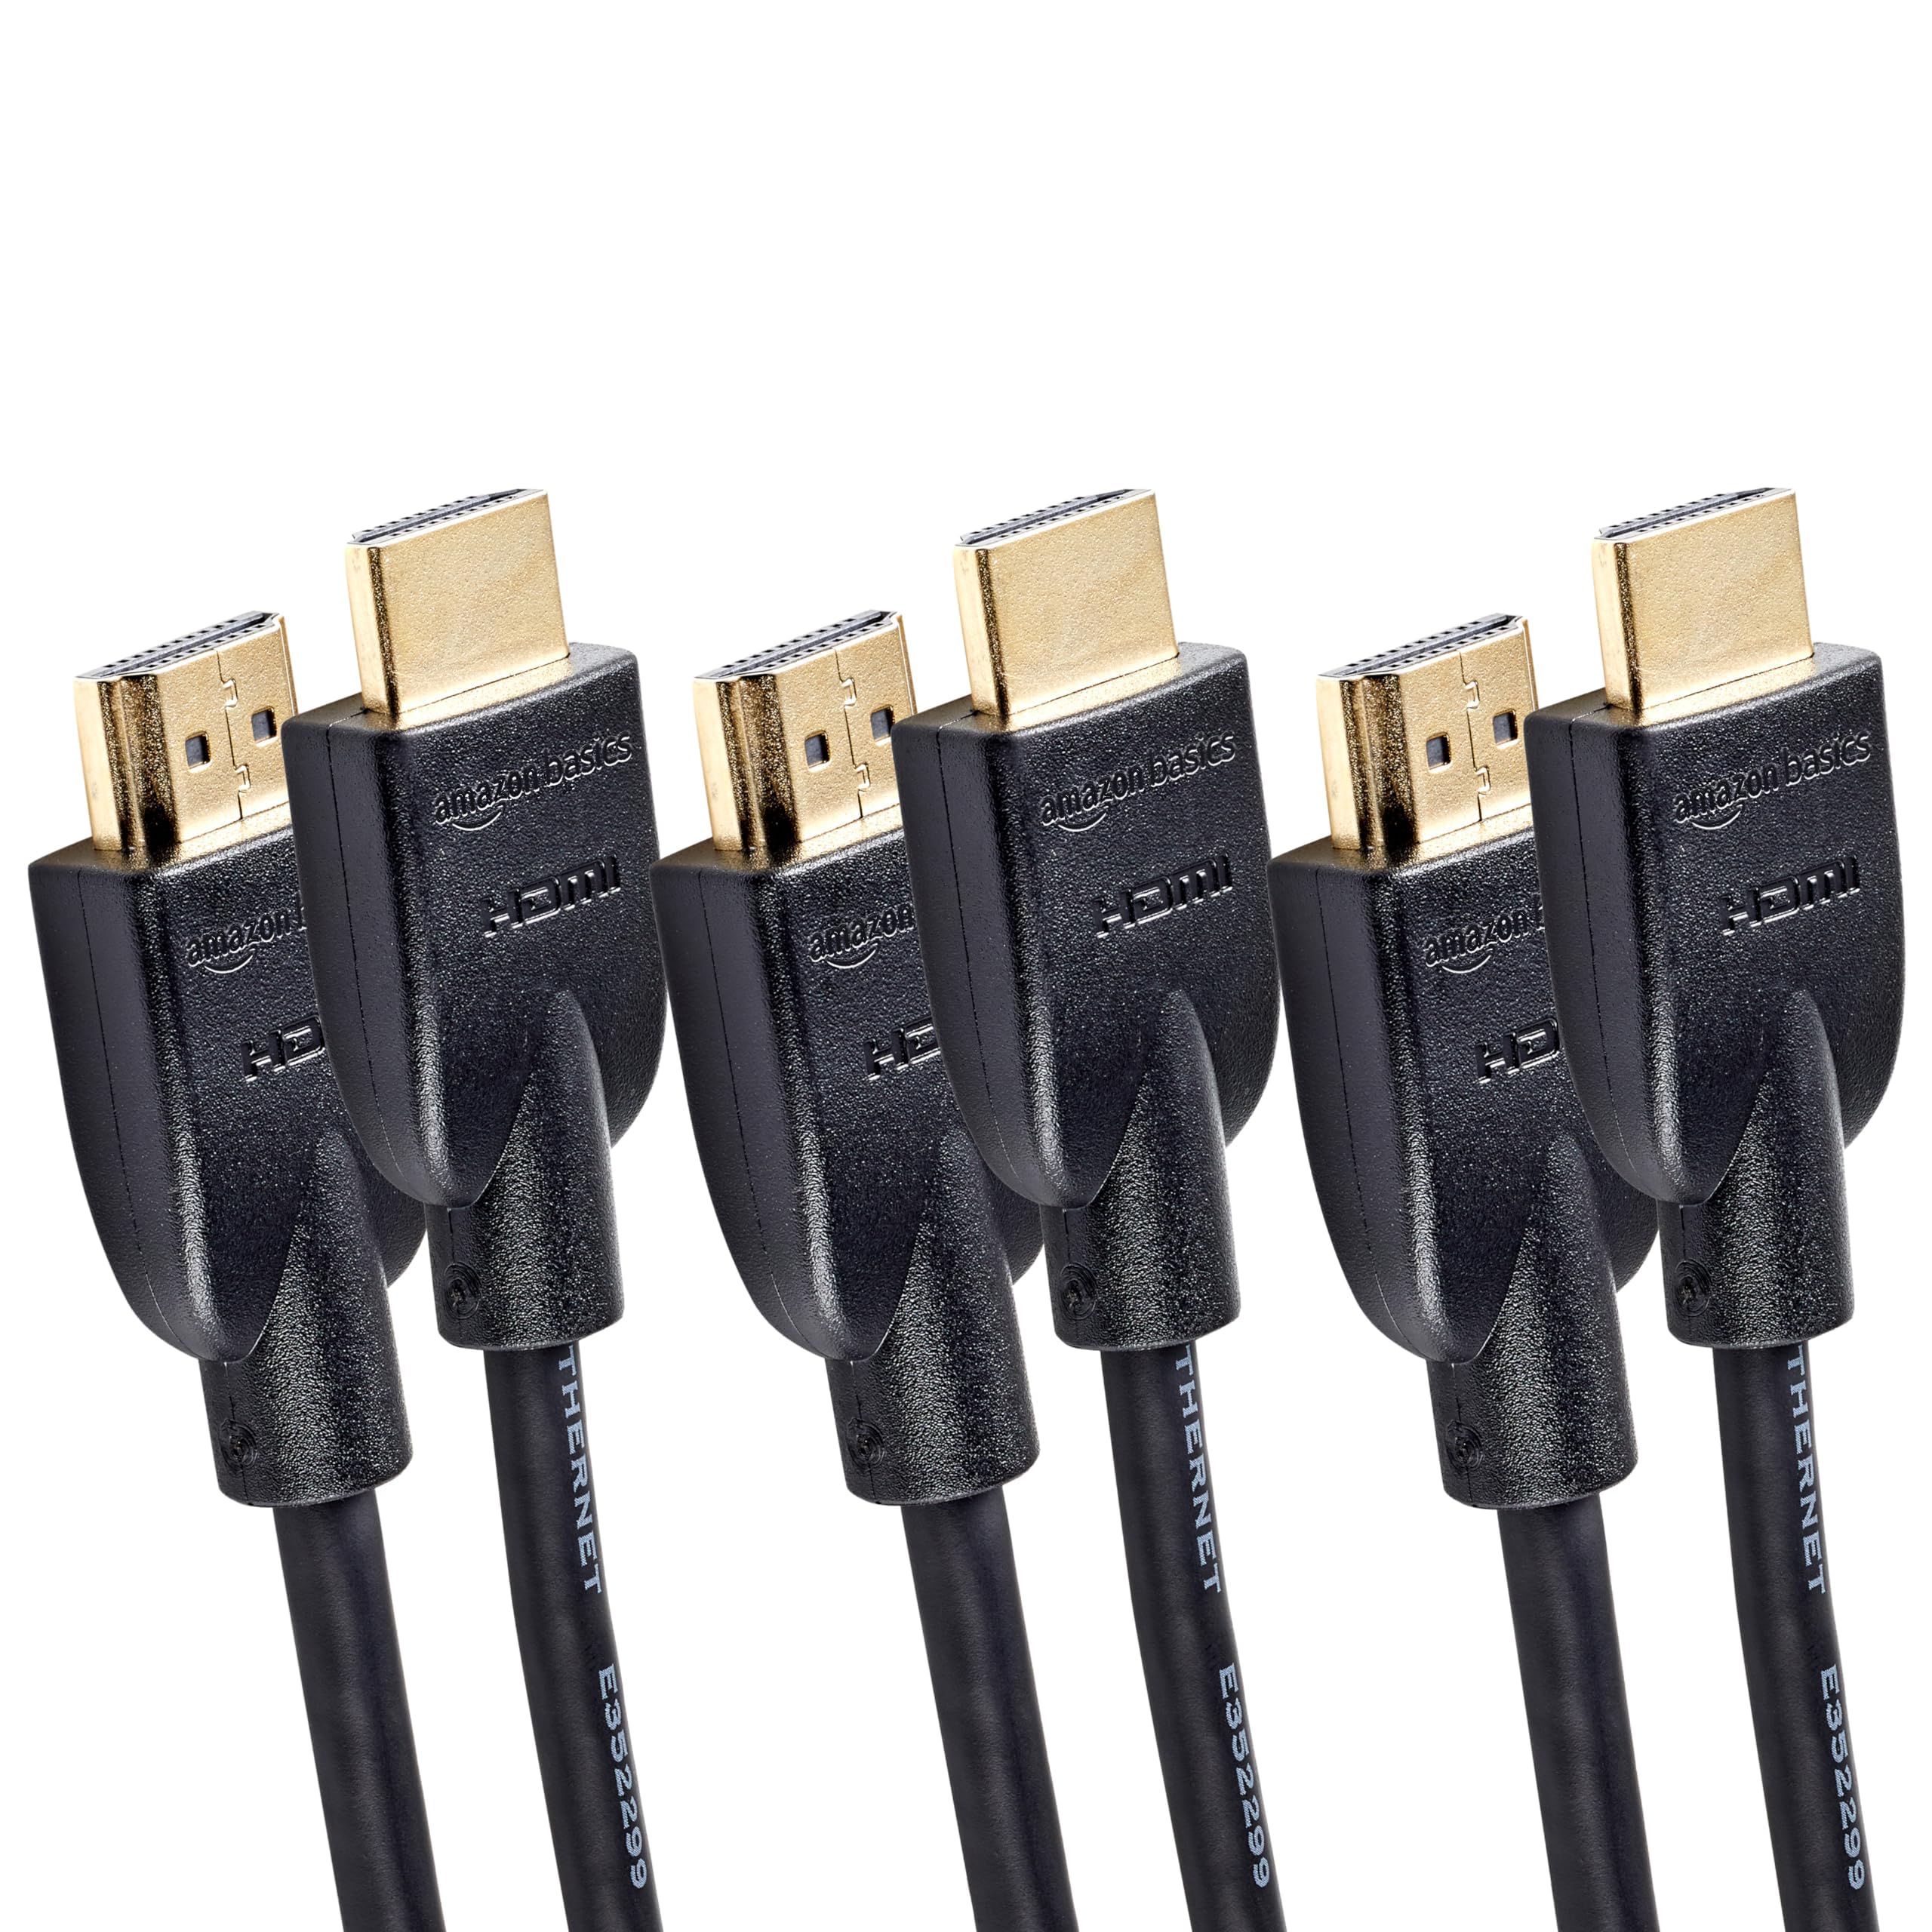 Different HDMI cables